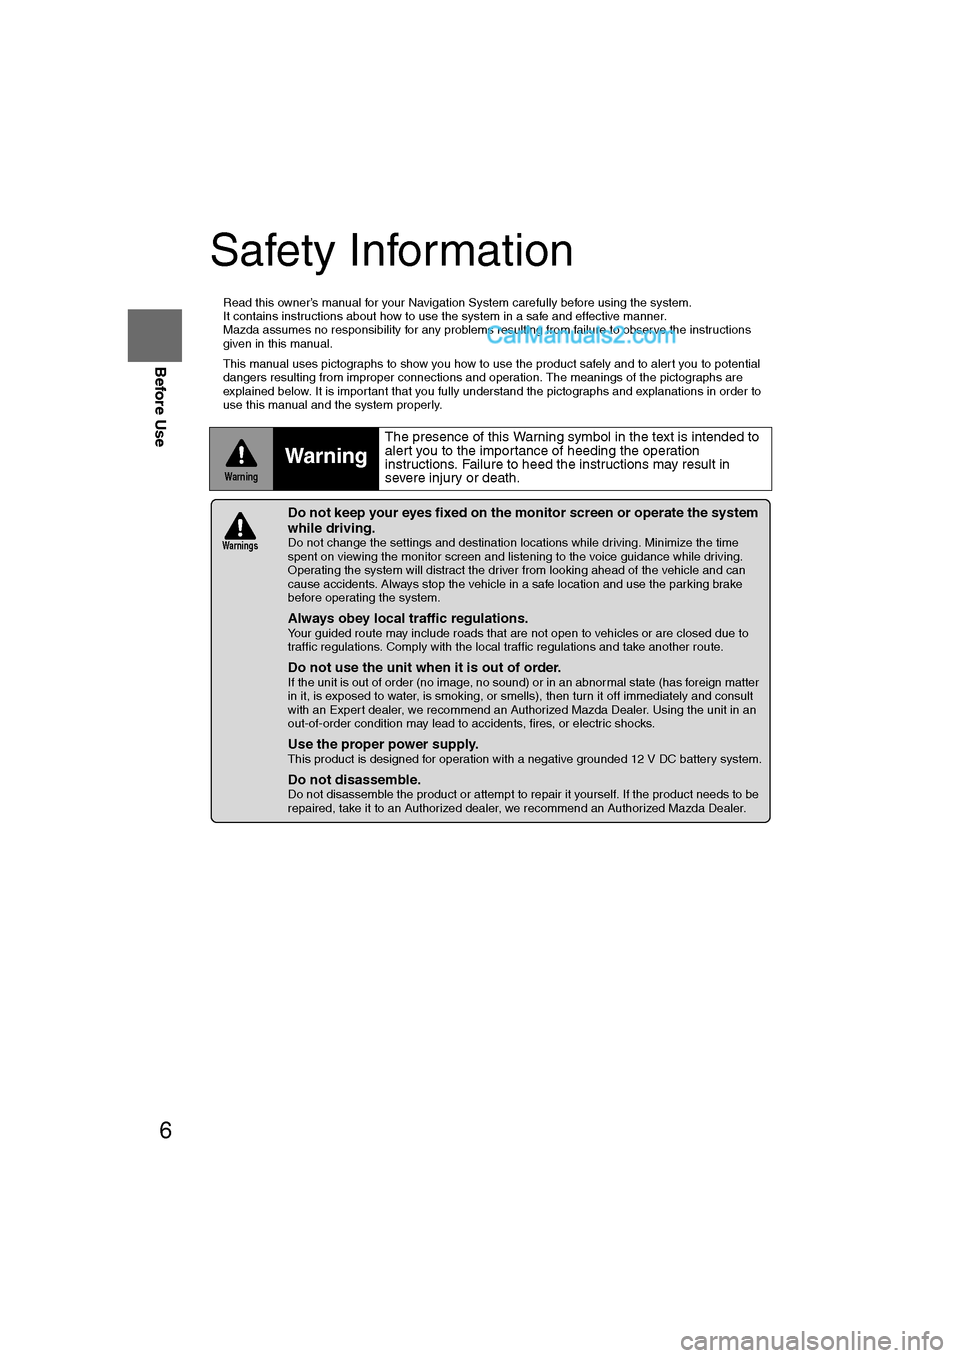 MAZDA MODEL CX-9 2011  Navigation Manual (in English) 6
Before Use
Navigation 
Set Up
RDM-TMCIf
necessary
Rear View 
Monitor
Safety Information
n
Read this owner’s manual for your Navigation System carefully before using the system. 
It contains instru